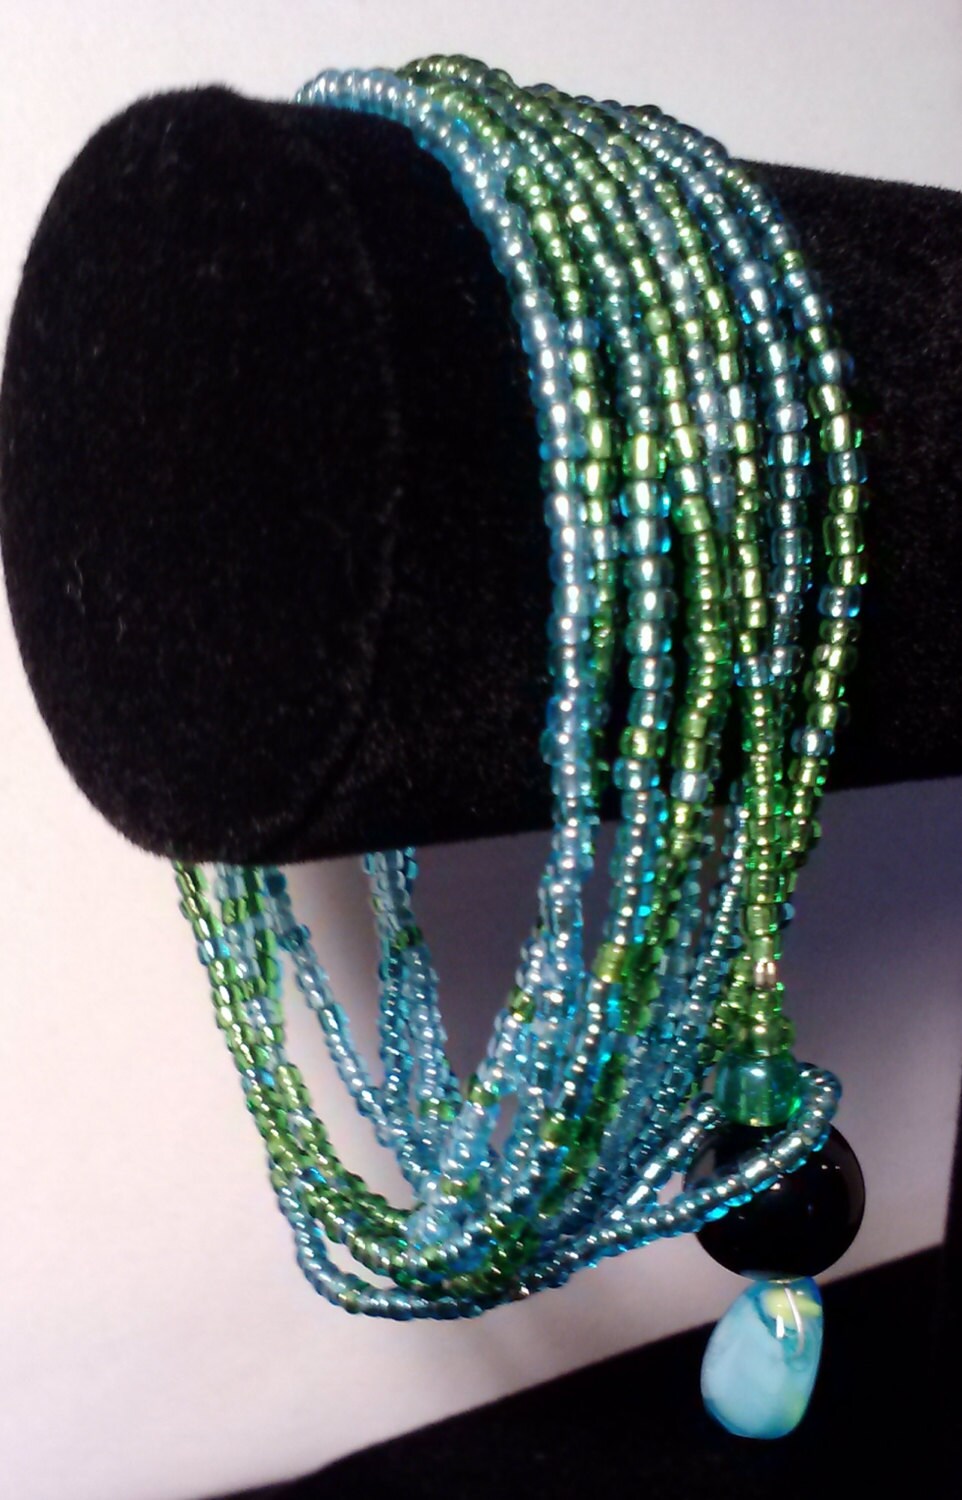 Handmade Beaded Lariat Necklace in Blue Green and Aqua with